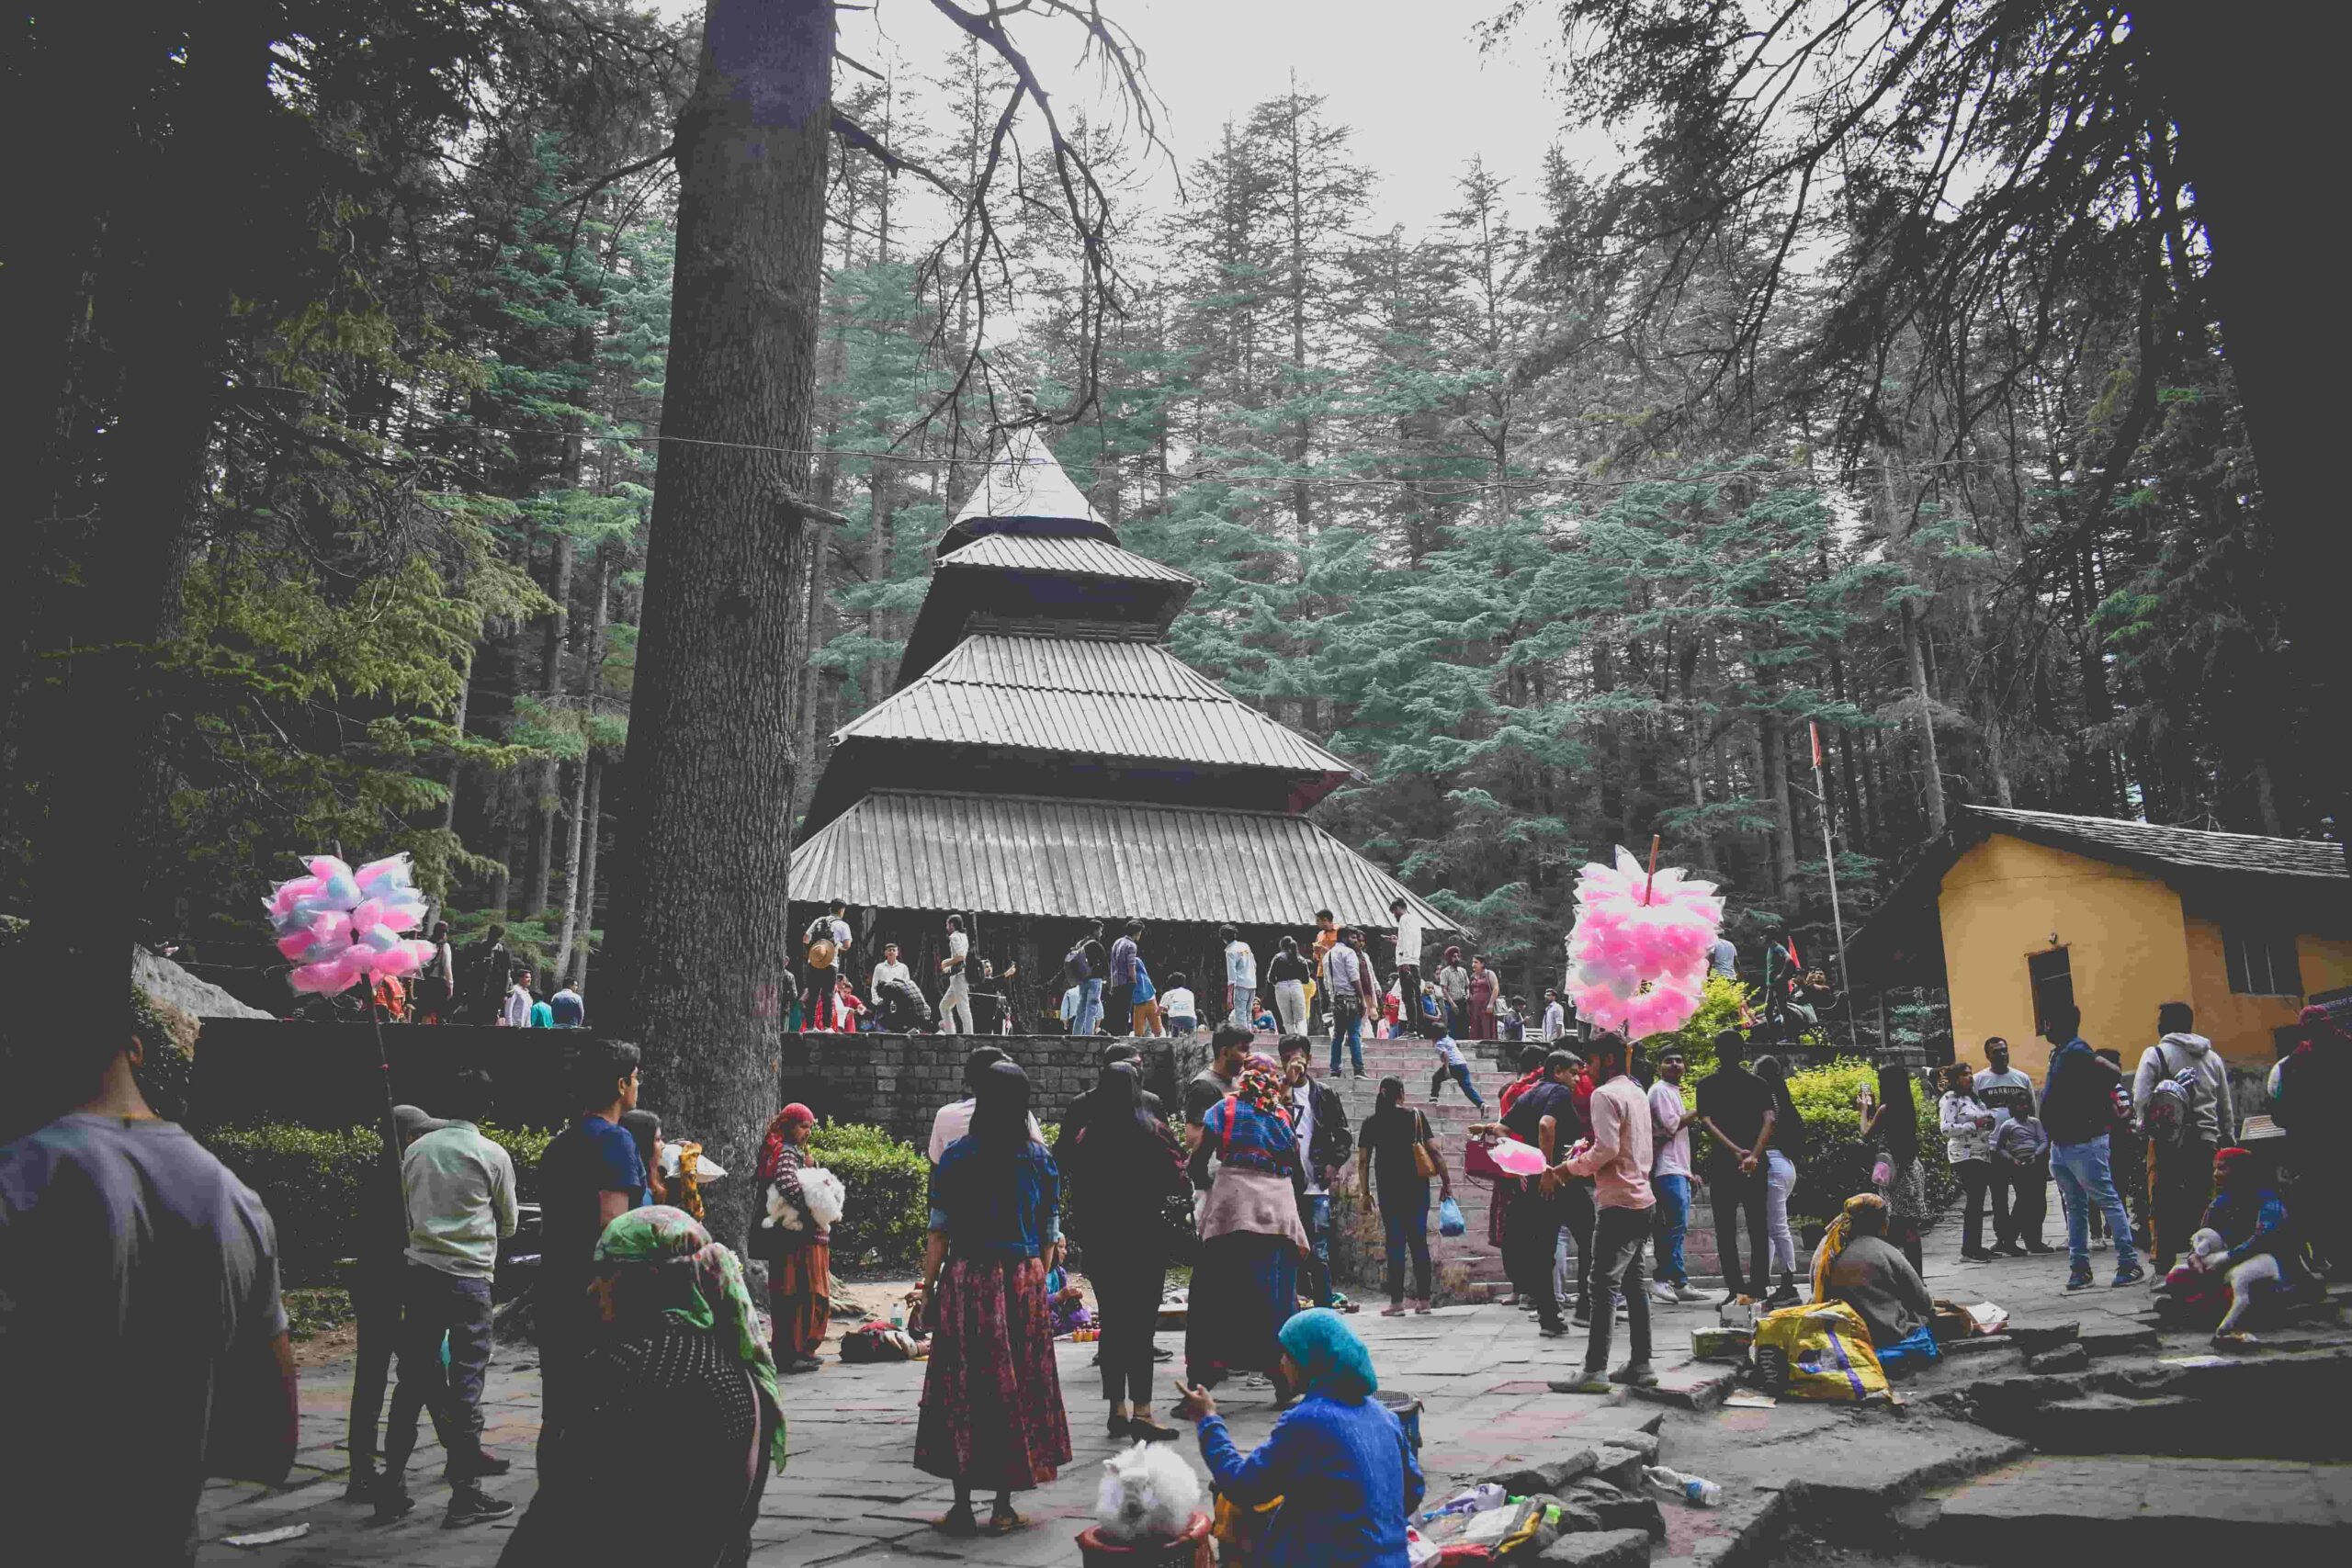 hadimba temple is one of the most beautiful places to visit in Manali